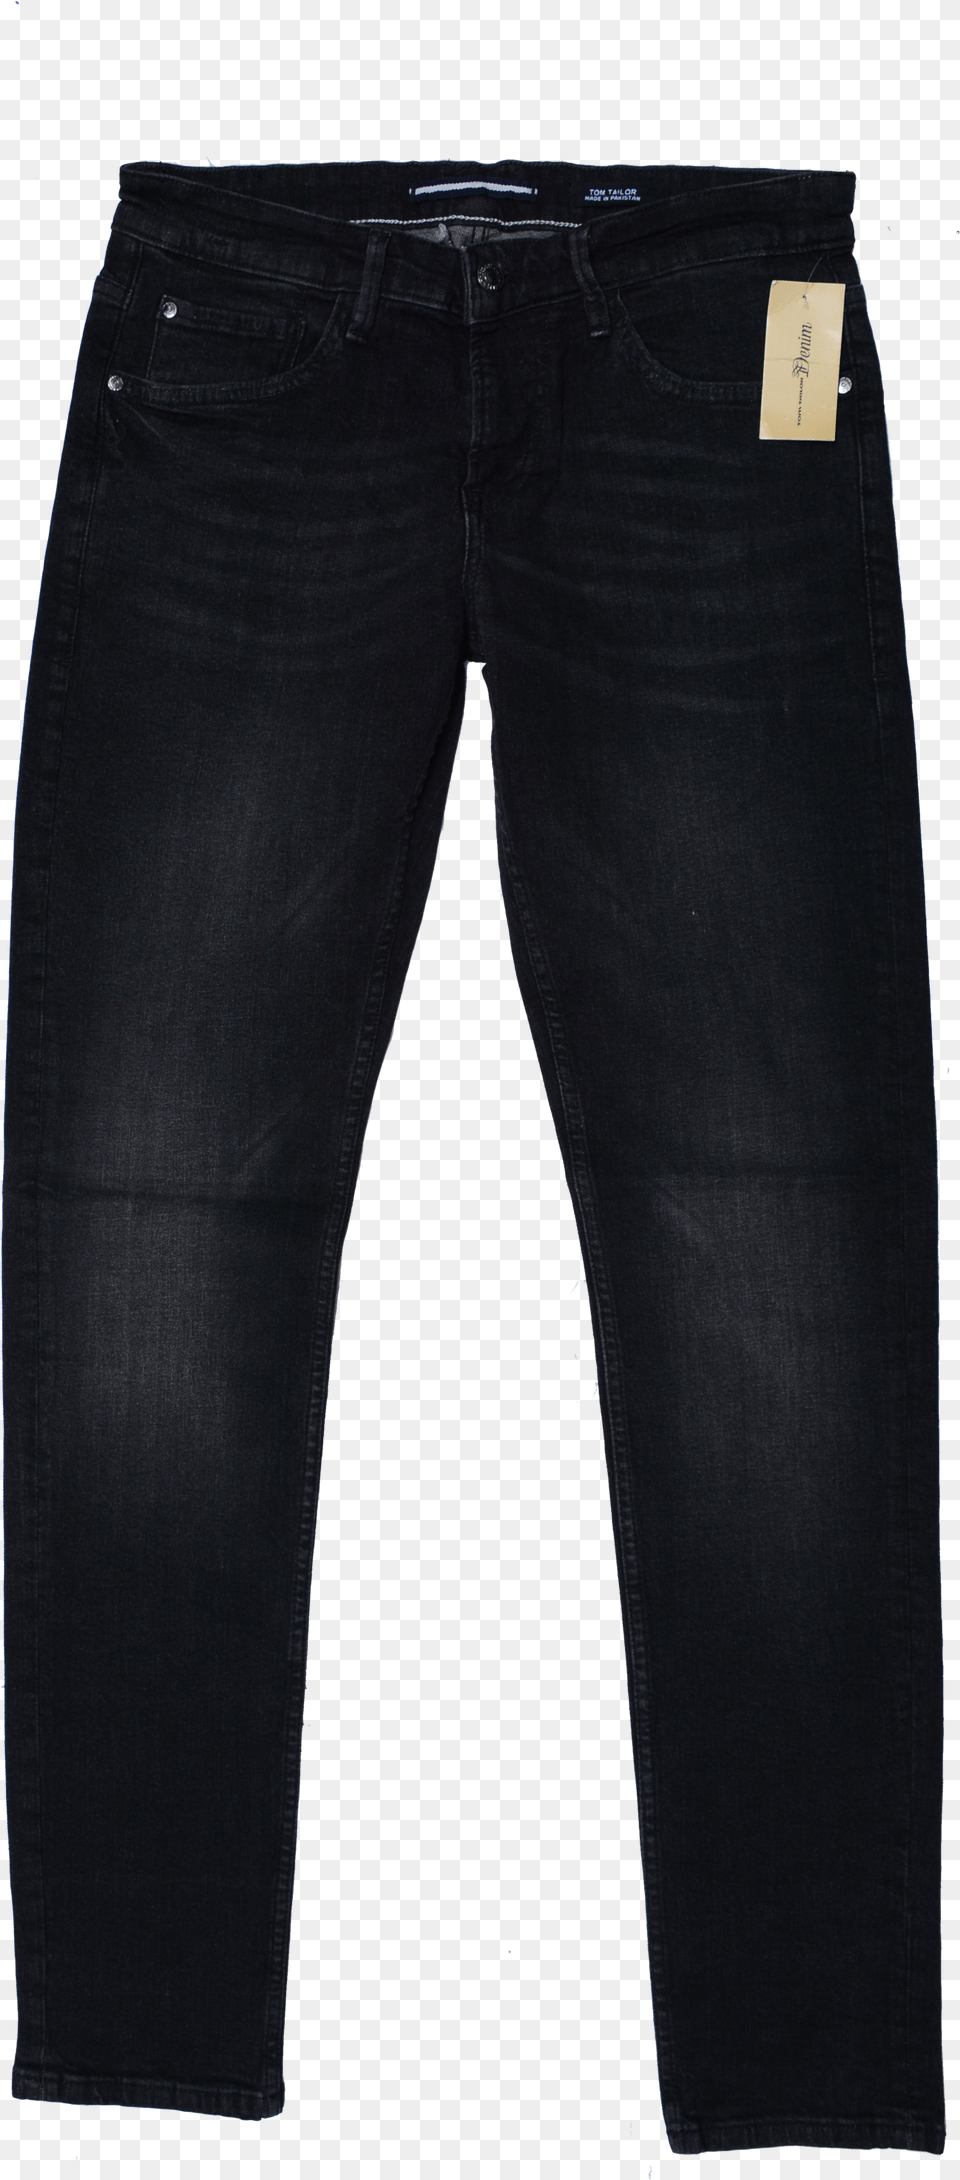 Black Fade Pocket, Clothing, Jeans, Pants Free Png Download